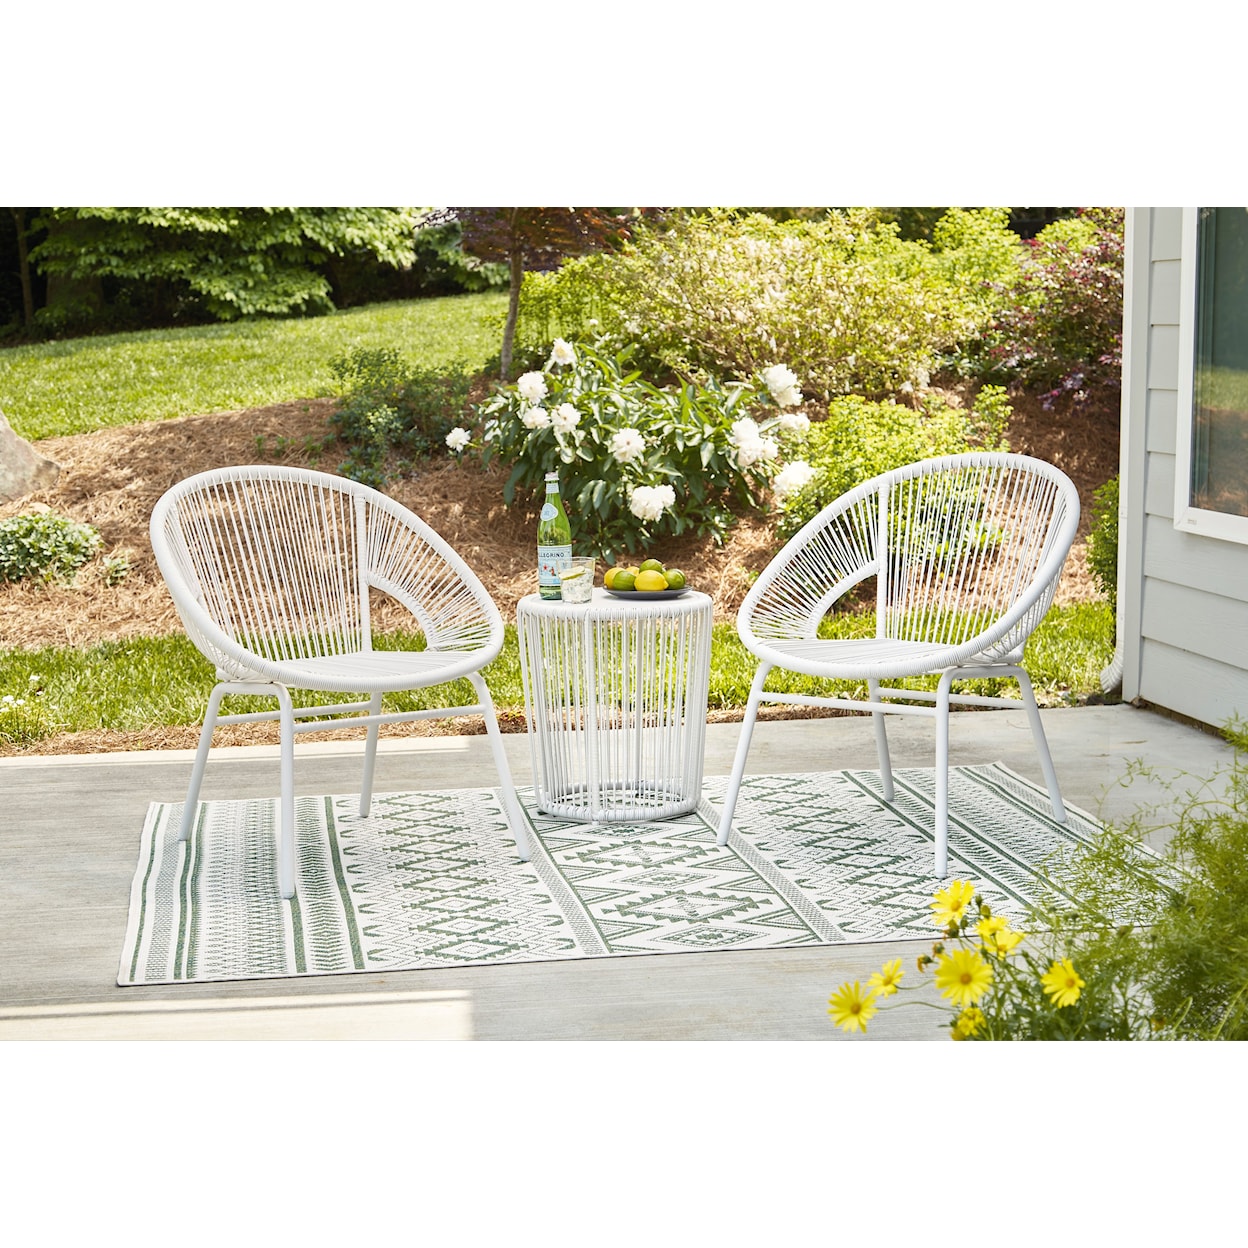 Benchcraft Mandarin Cape Outdoor Table and Chairs (Set of 3)